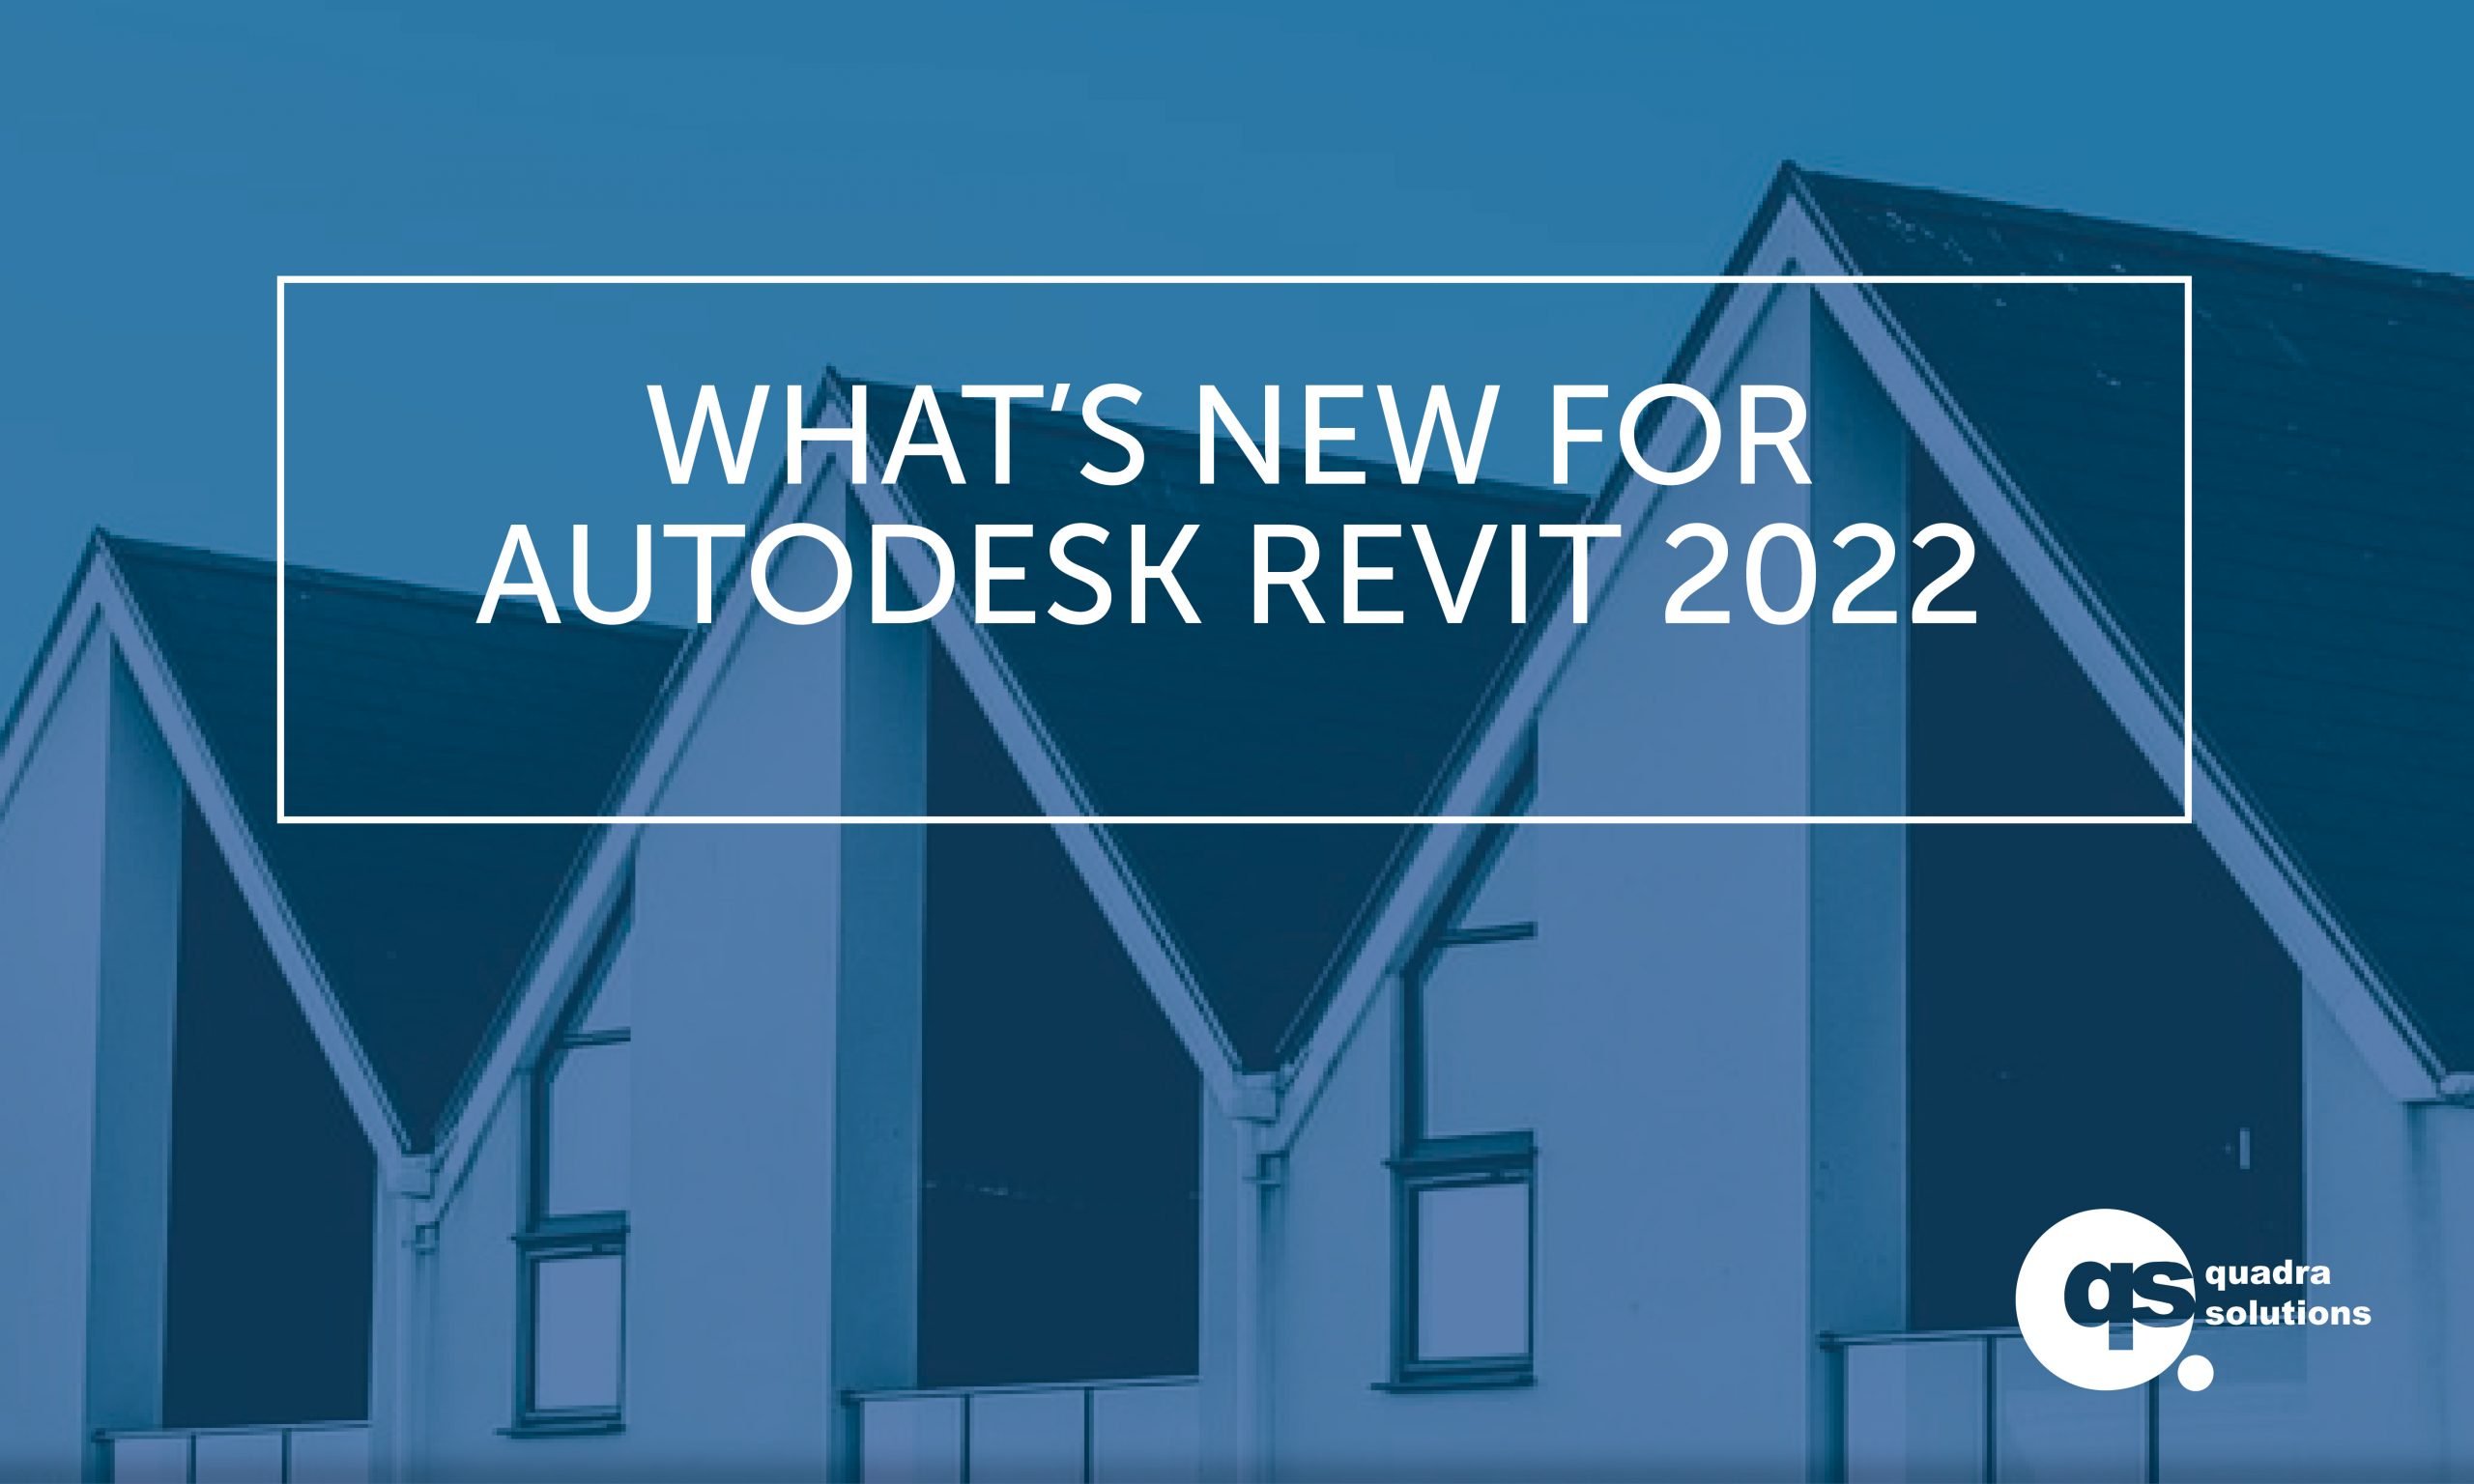 What’s New for Autodesk Revit 2022